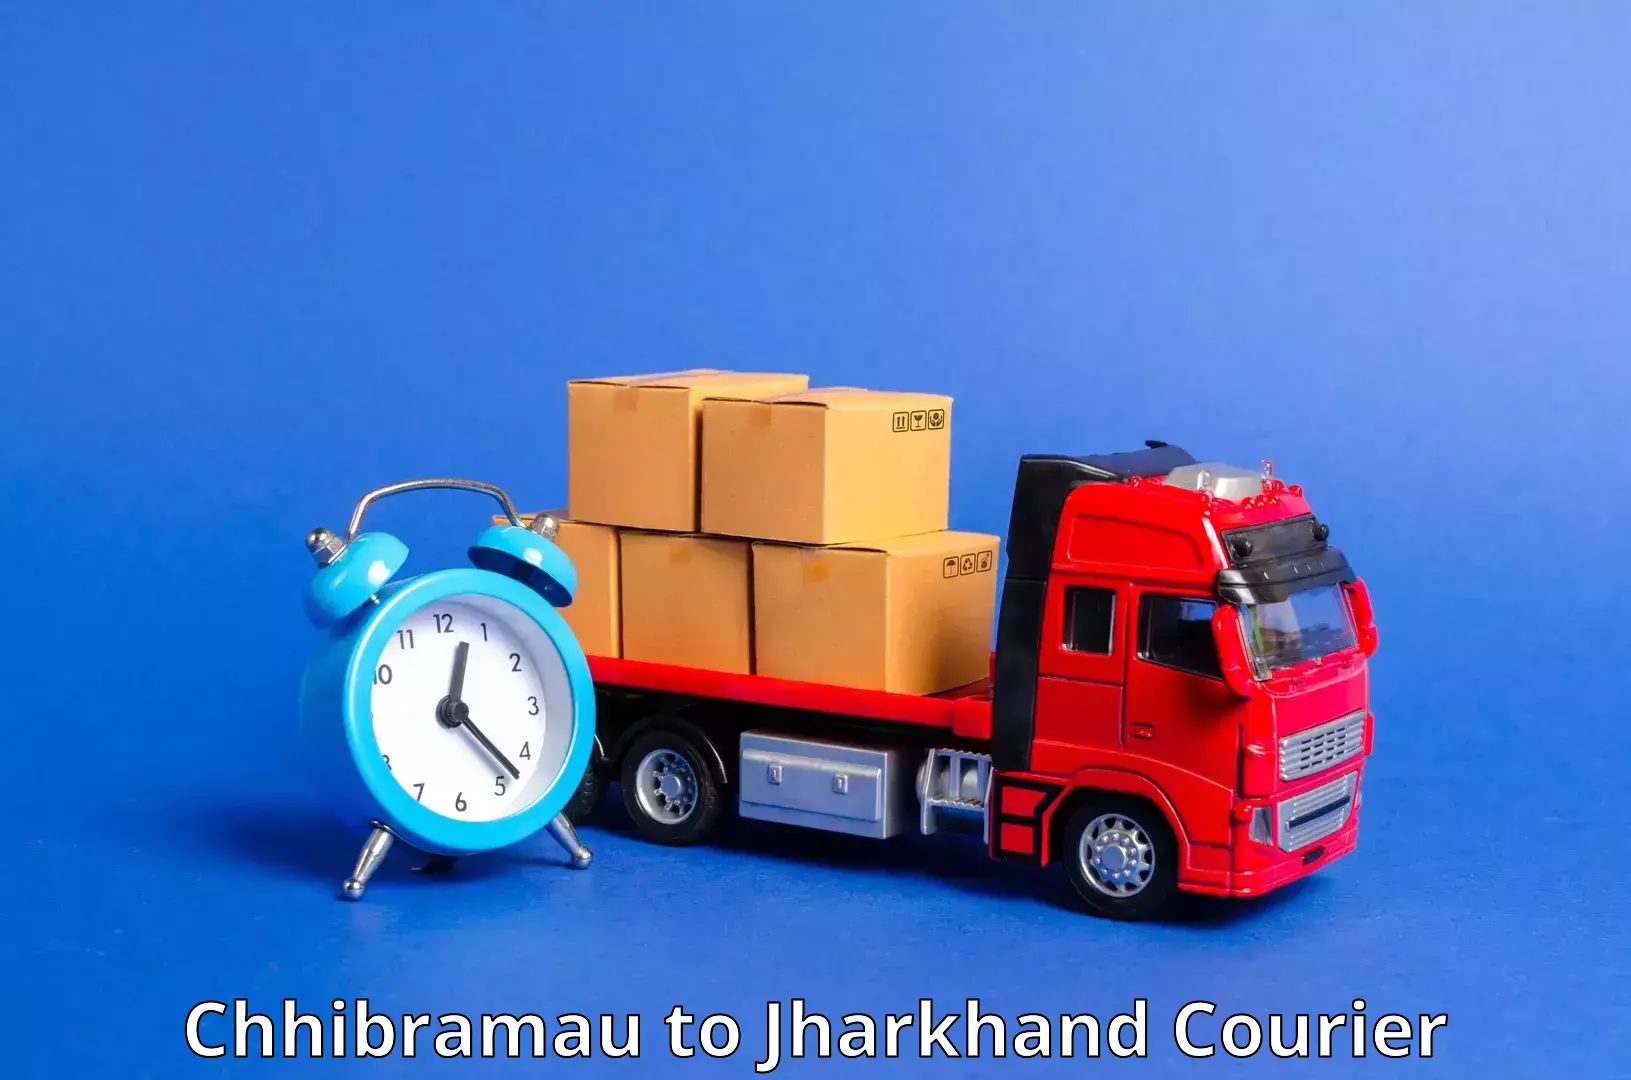 Fast delivery service in Chhibramau to Jharkhand